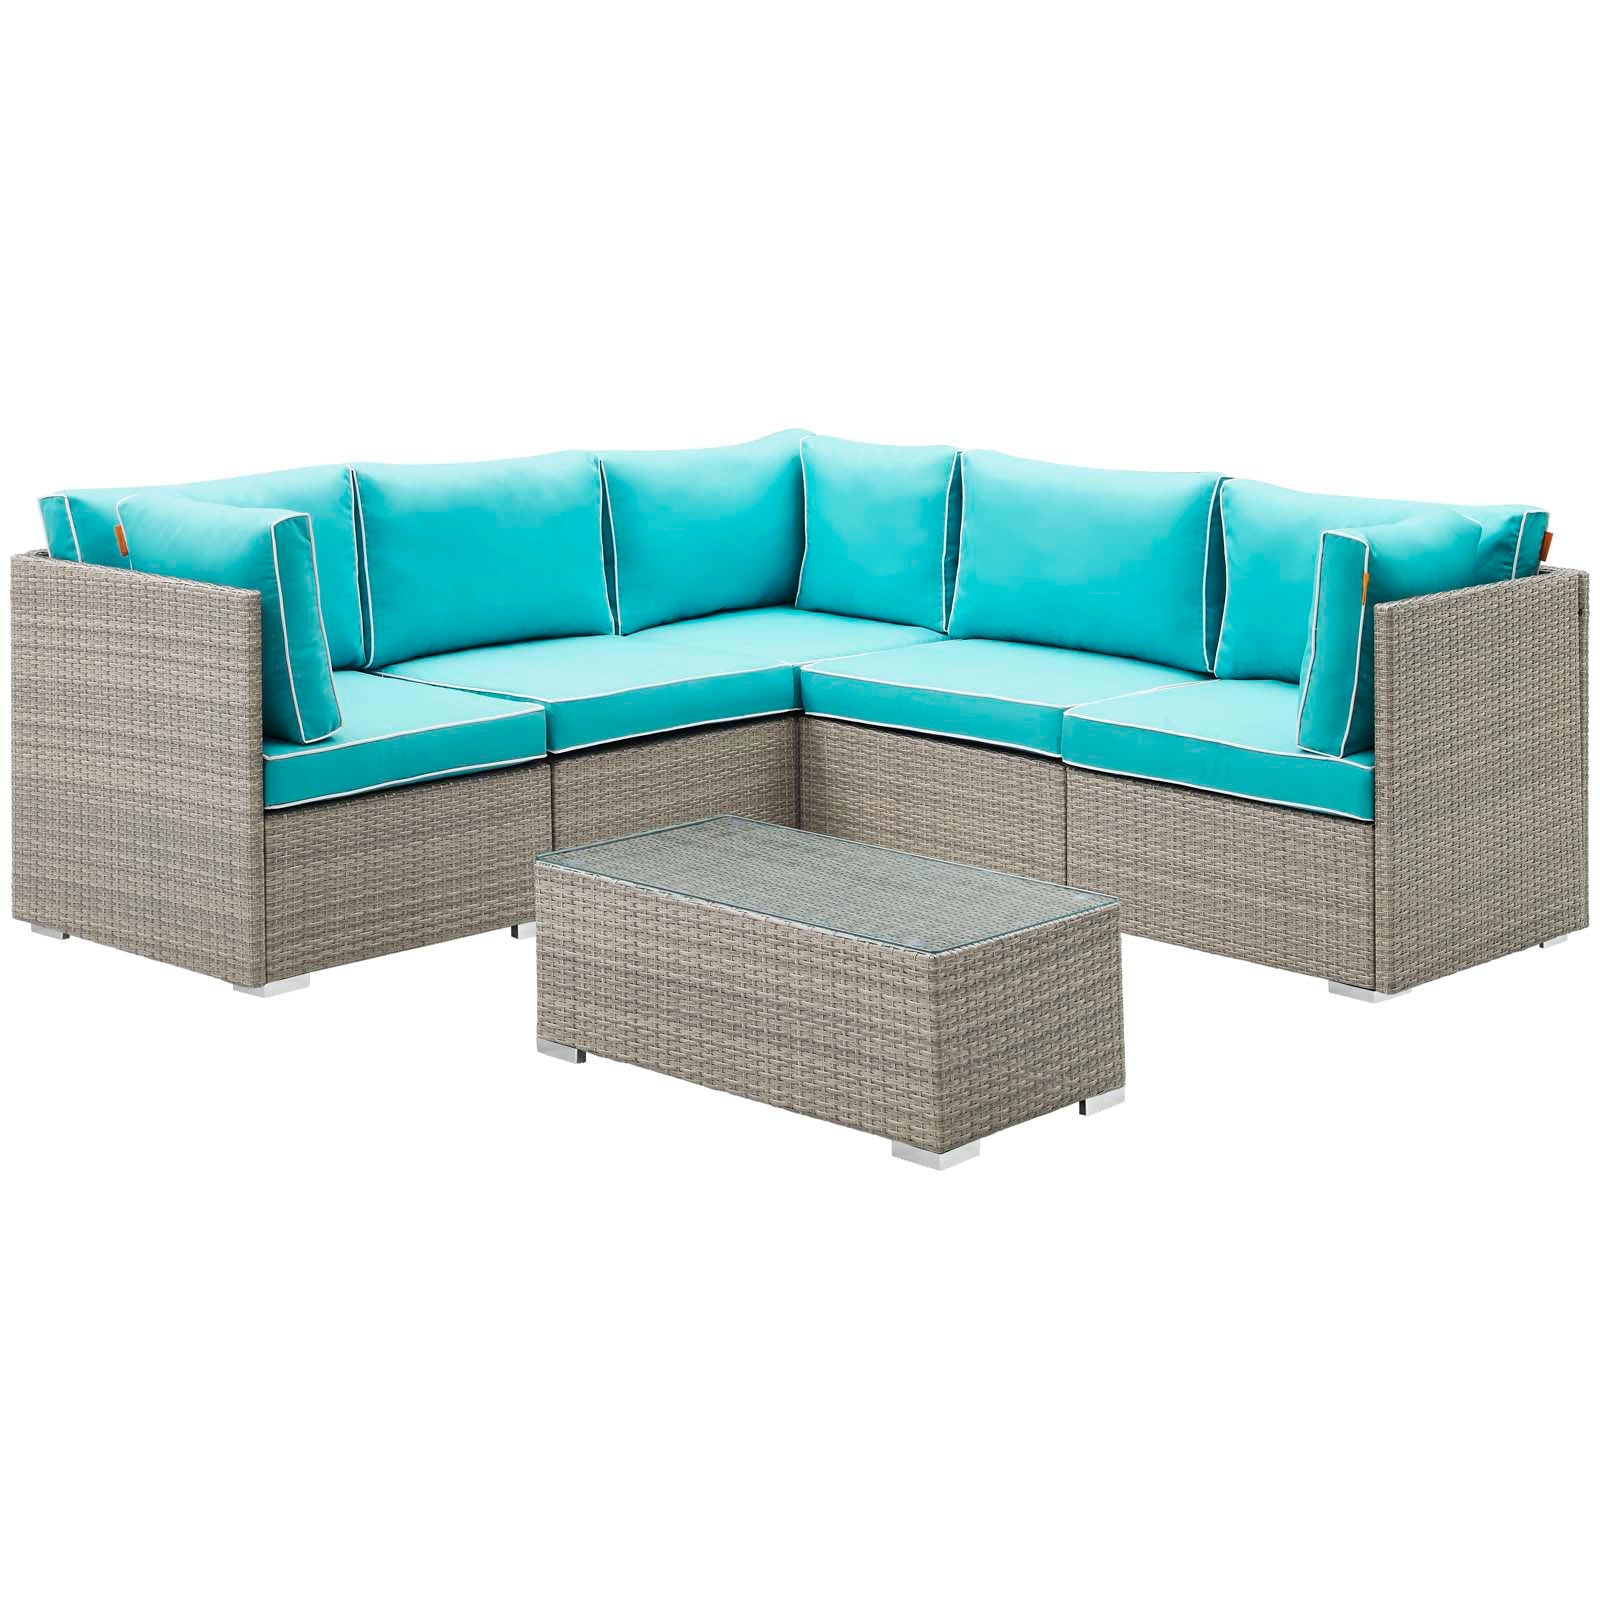 Repose 6 Piece Outdoor Patio Sectional Set - East Shore Modern Home Furnishings